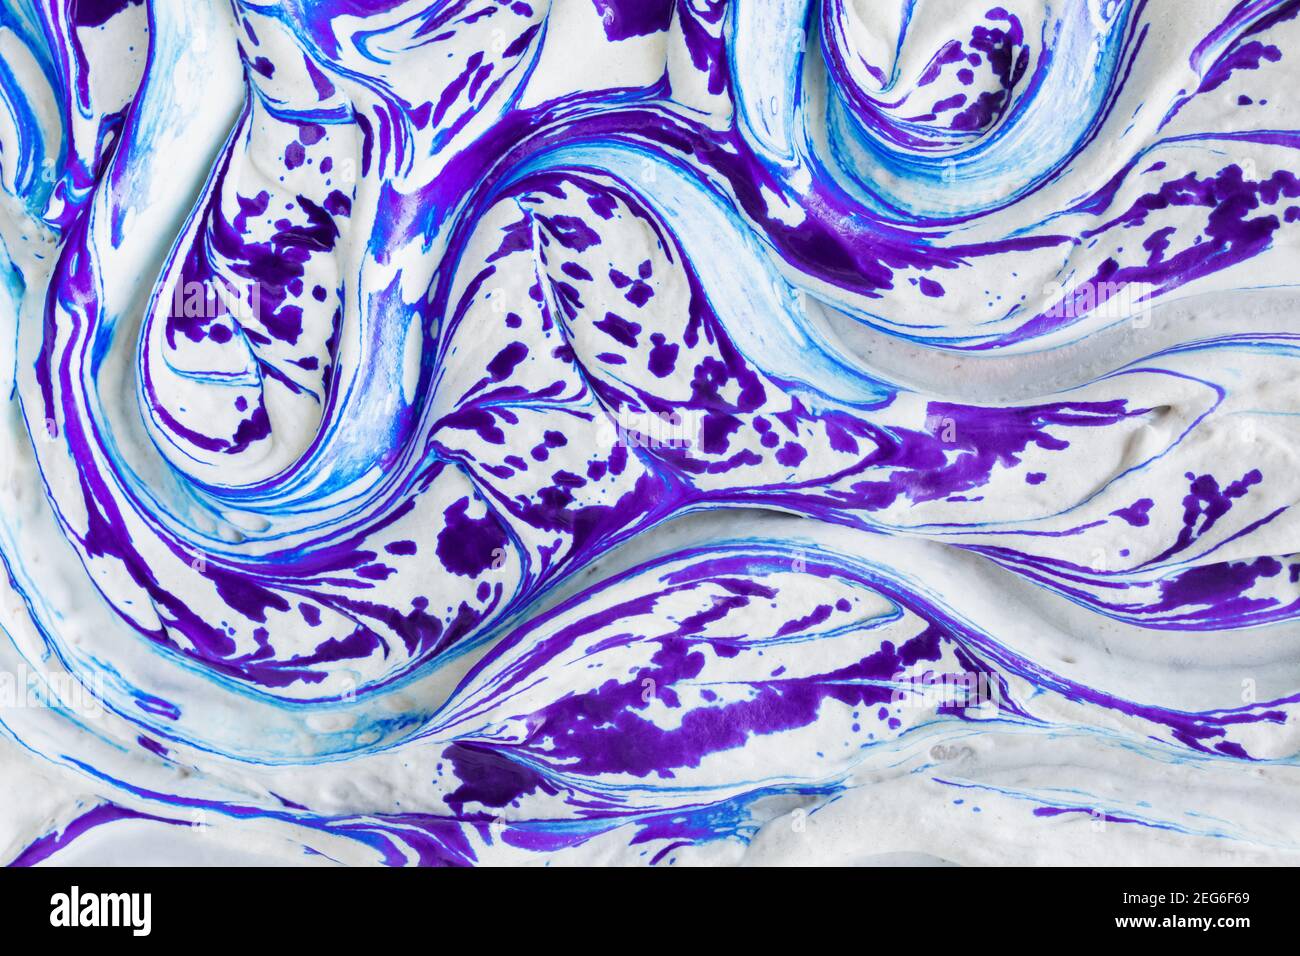 Fluid art artistic liquid marble texture background. White liquid soft cream surface with impressive splashes of violet ink and marble effect with lon Stock Photo